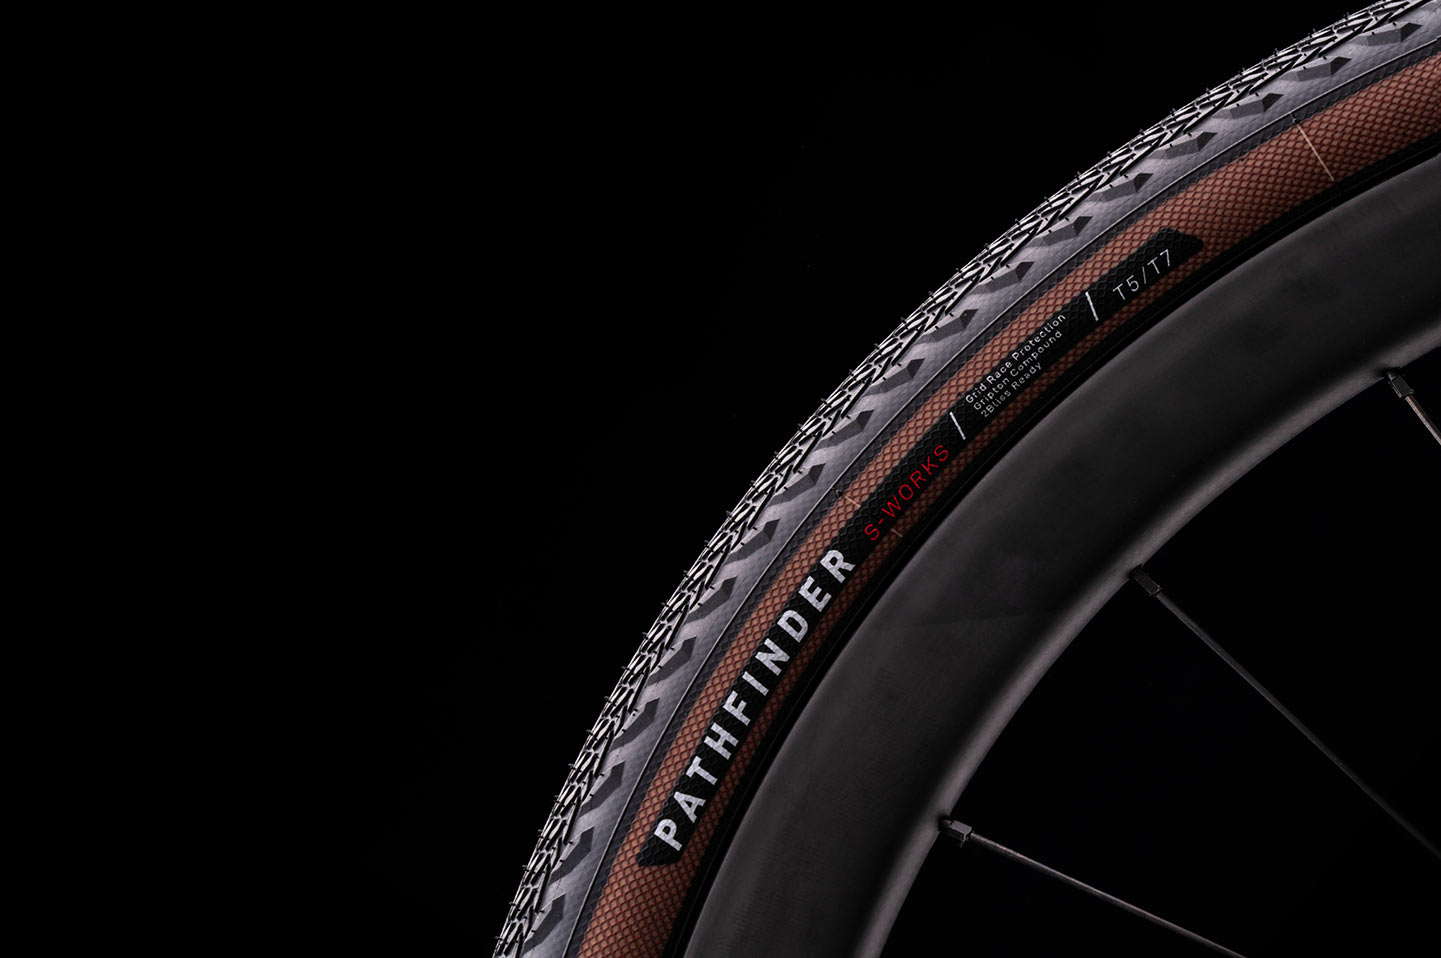 specialized s-works pathfinder gravel bike tire shown from the side